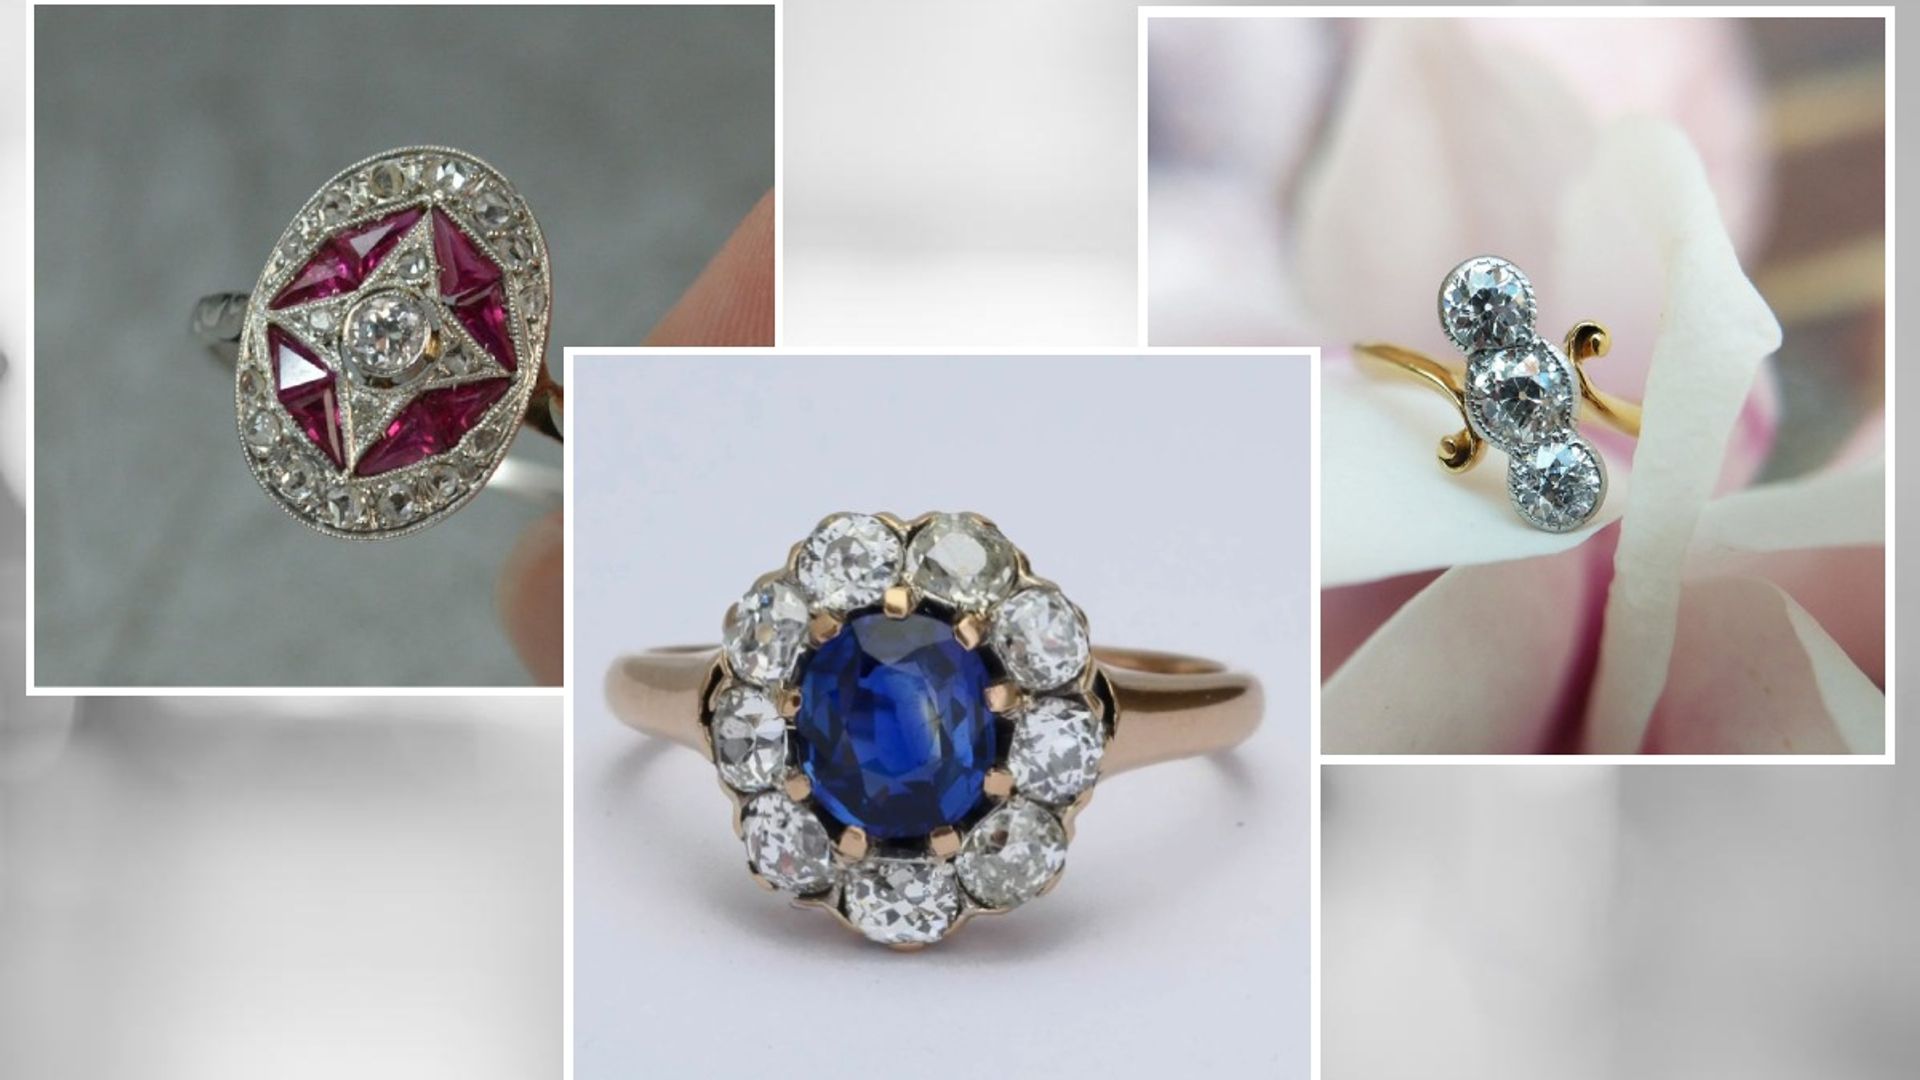 Where to buy an antique or vintage engagement ring - and the best styles to shop